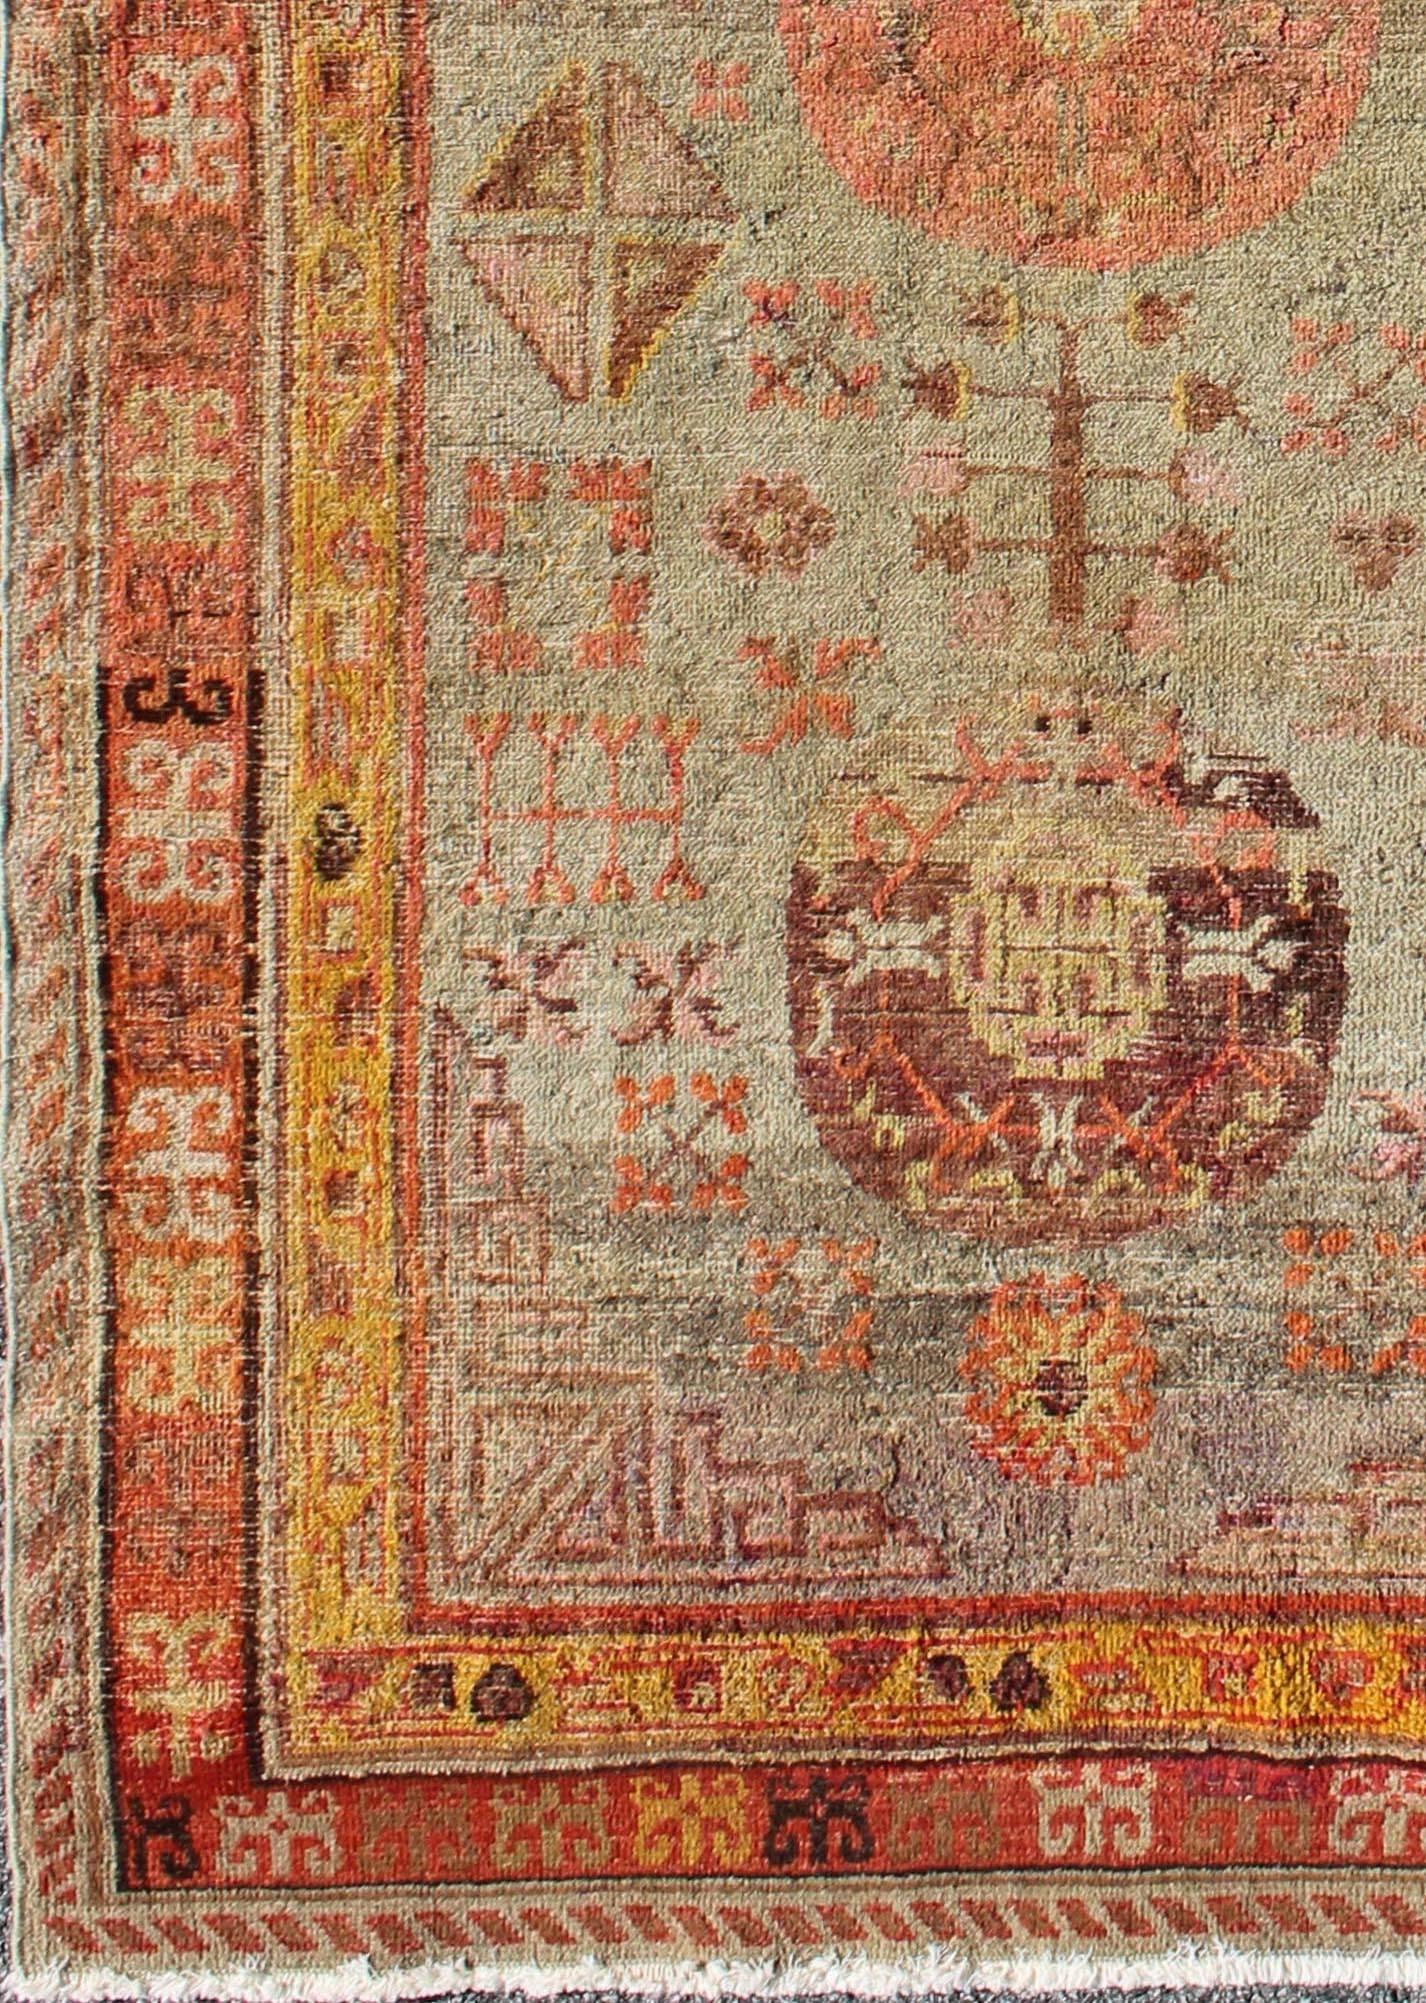 This antique, Central Asian Khotan rug from the early 20th century features a traditional, all-over floral, geometric pattern set on a silver-gray field. The central field is surrounded by multiple complementary floral borders of coral flowers with